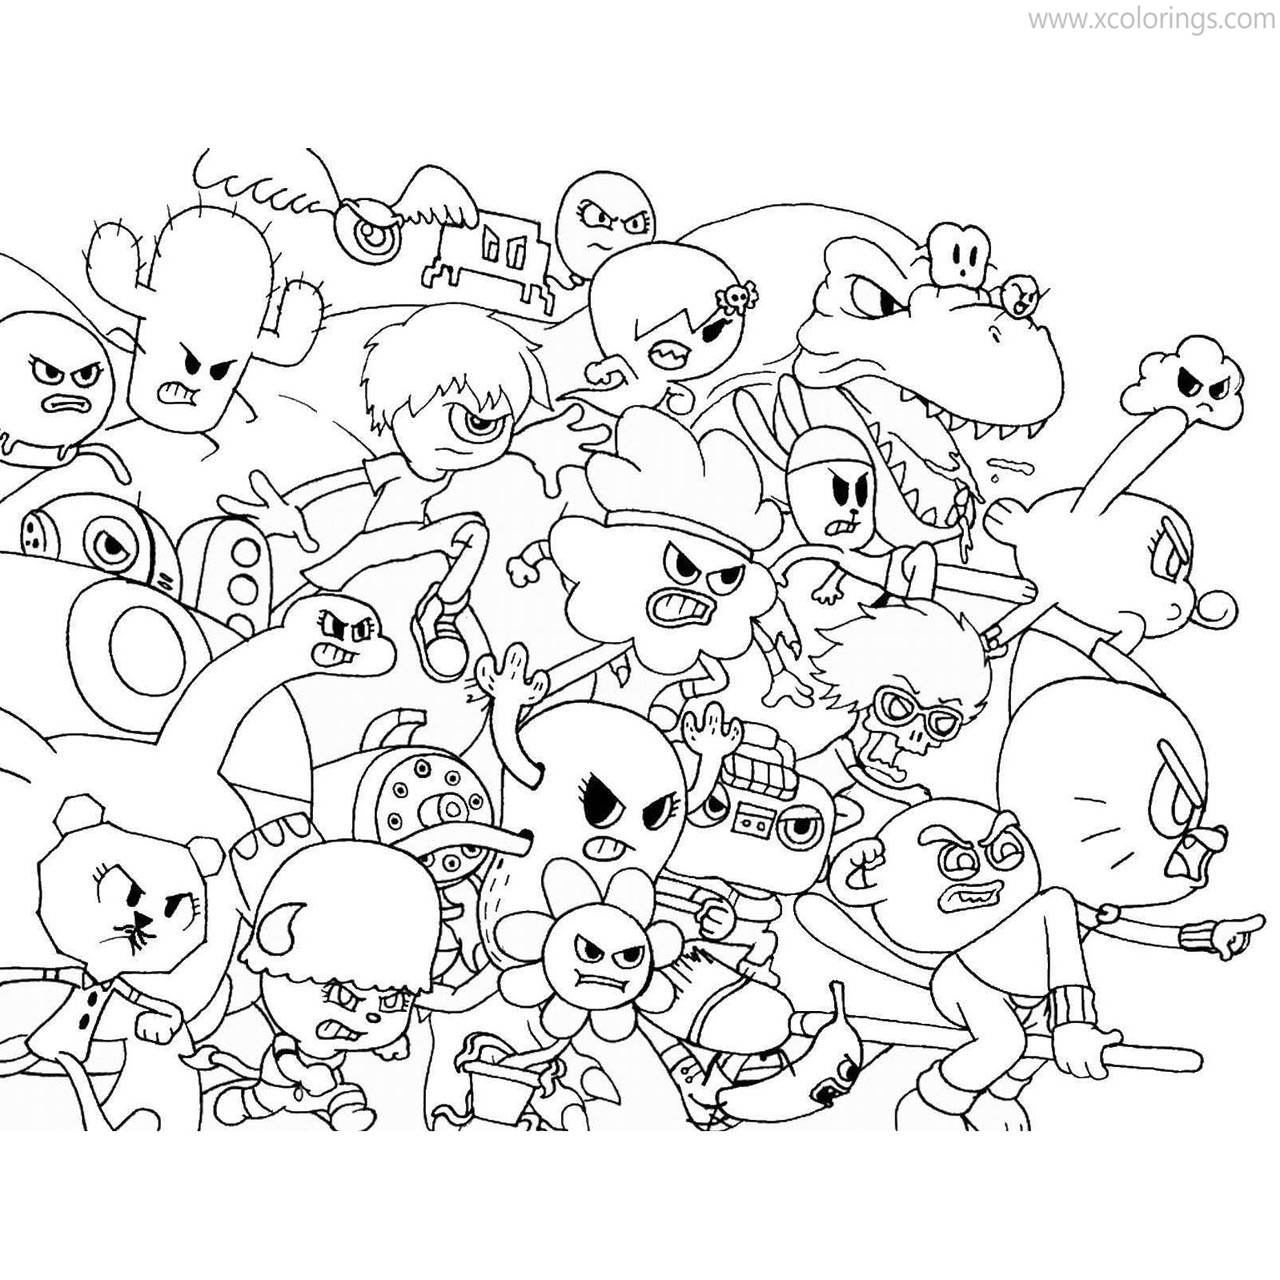 Free Characterized from The Amazing World of Gumball Coloring Pages printable